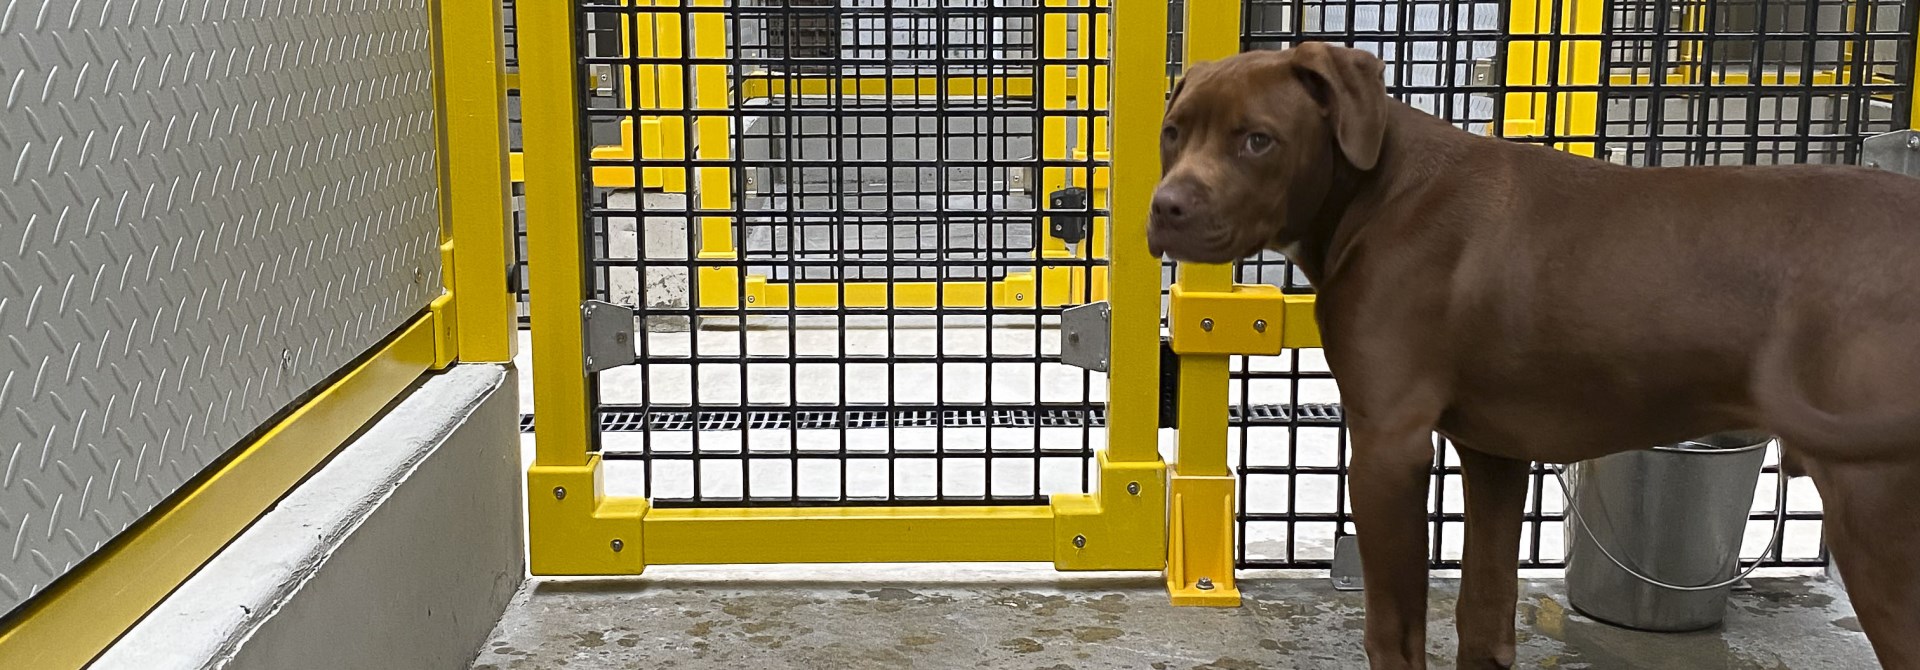 A chocolate brown dog in a newly upgraded animal shelter, with concrete floor and yellow and black cage door.